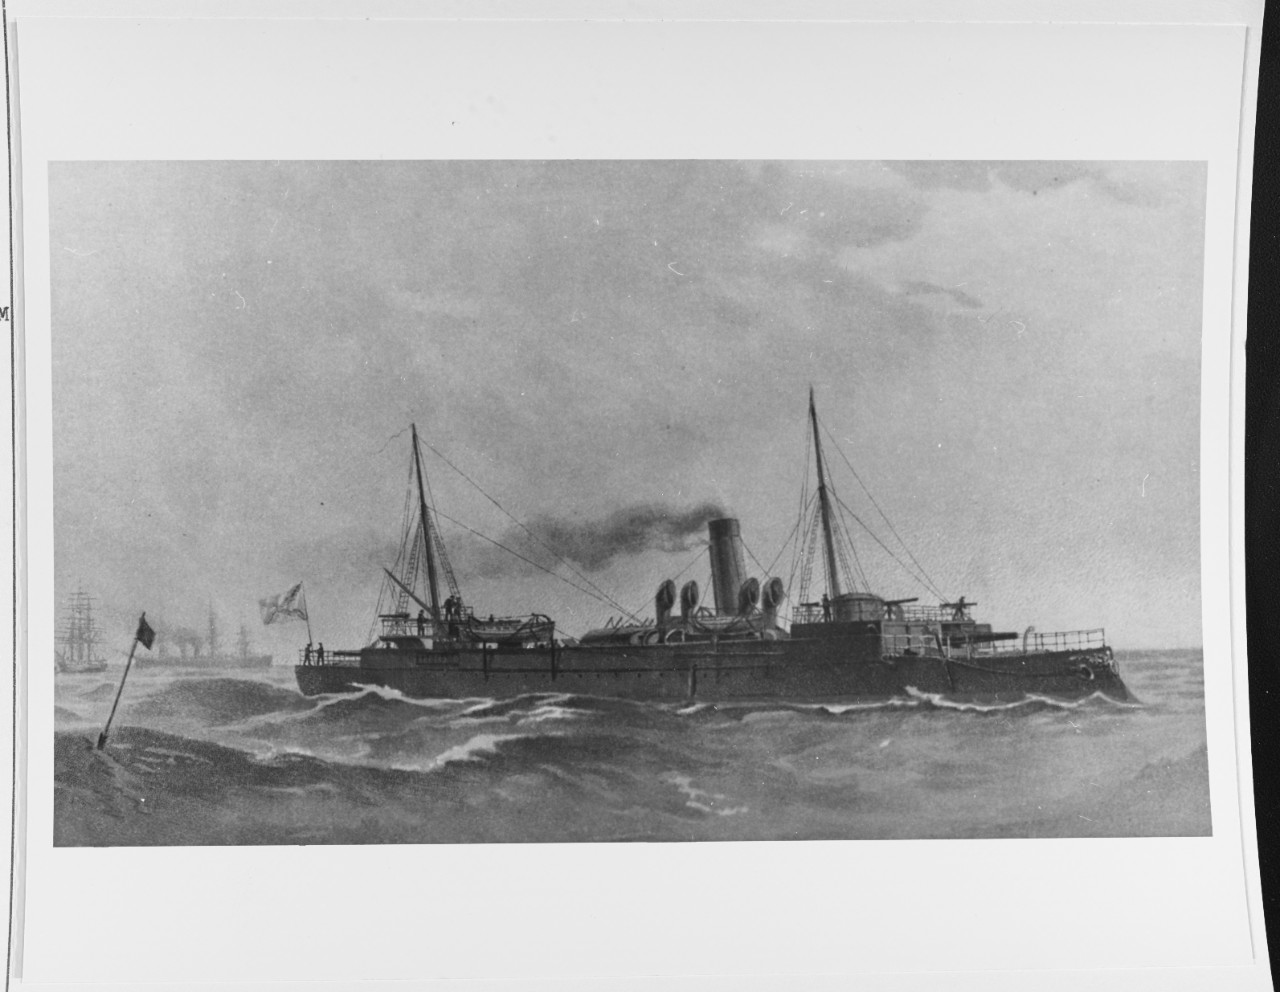 GROZIASTCHY (Russian armored gunboat, 1890)